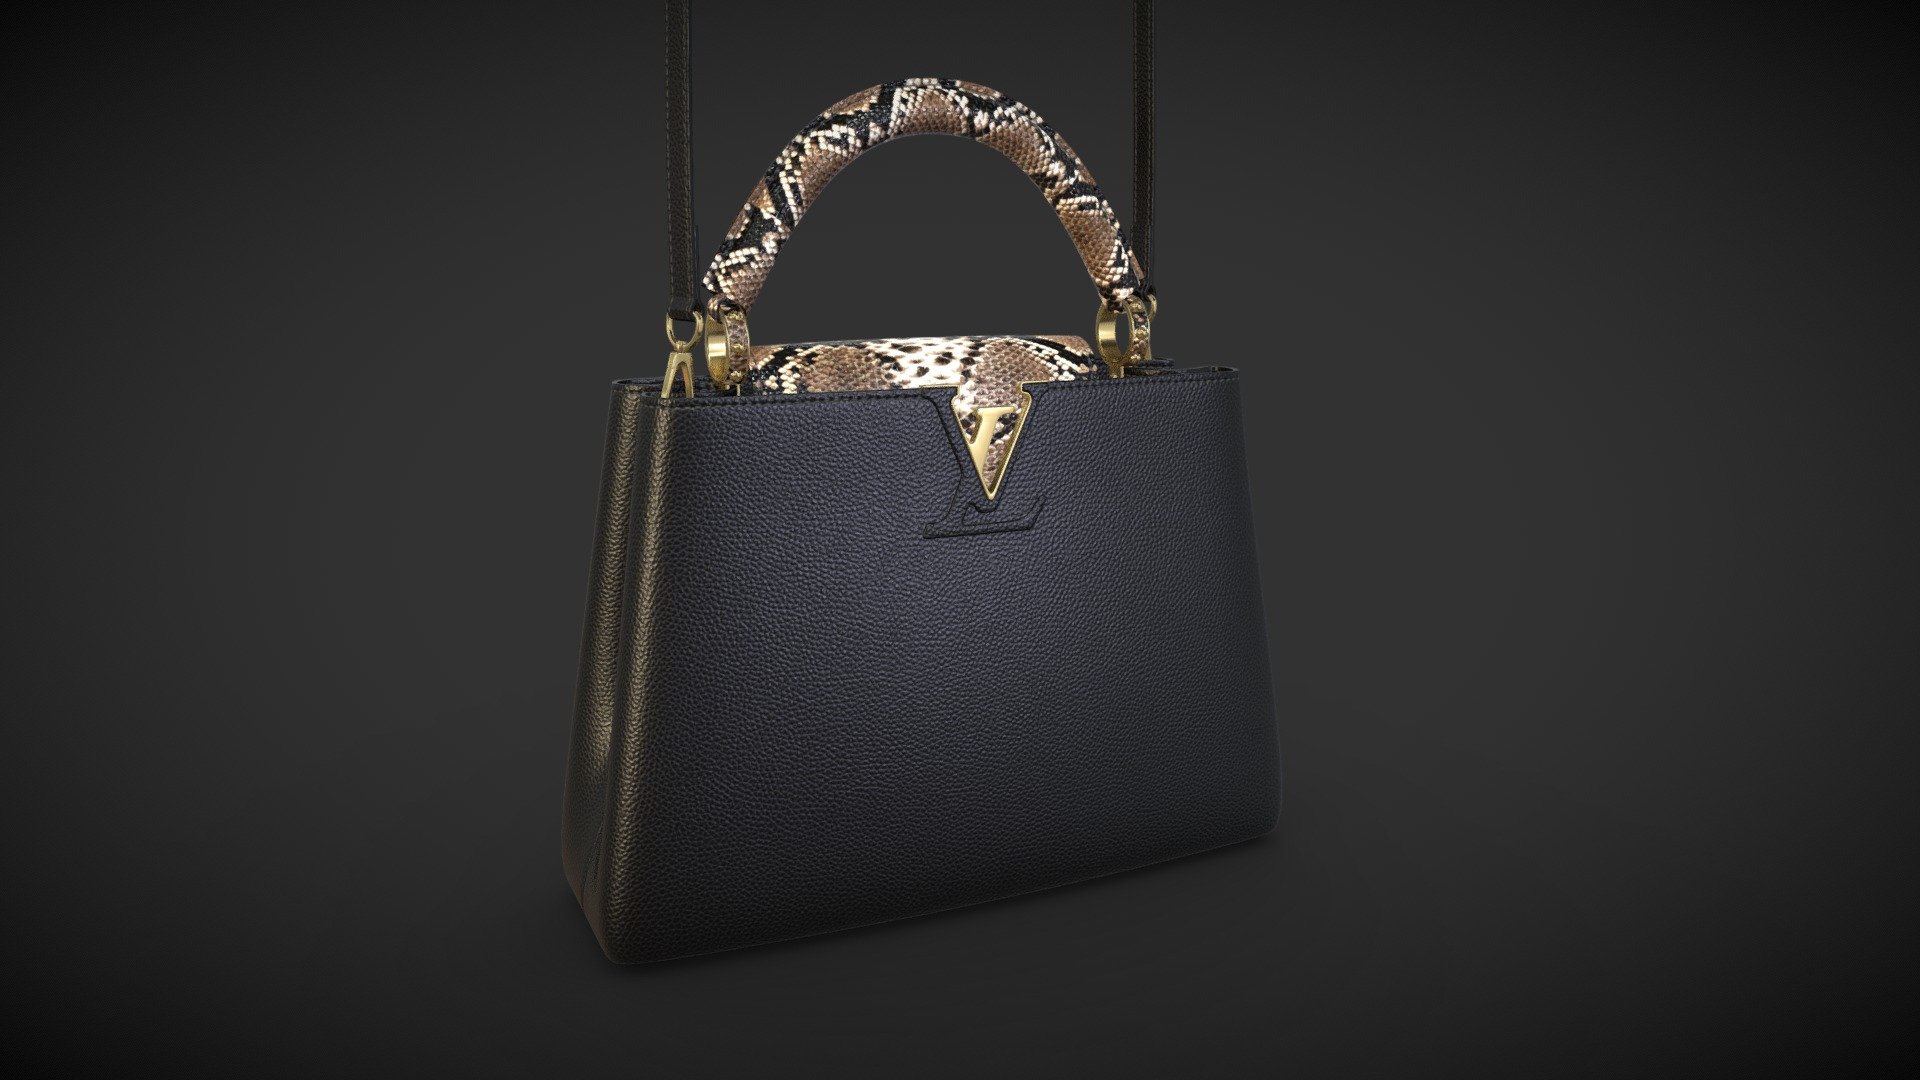 Model created with 3ds Max and Textured in 4K
Native Max file setup with V-Ray materials

- Textures 4096x4096 (4K PBR Textures)
PBR MetallRoughness (BaseColor, Metallic, Height, Normal, Roughness )

Version without shoulder strap: Polygons- 37897 , Vert - 38285

Hope you like it! If you need other options, please contact me. Also check out my other models 3d model